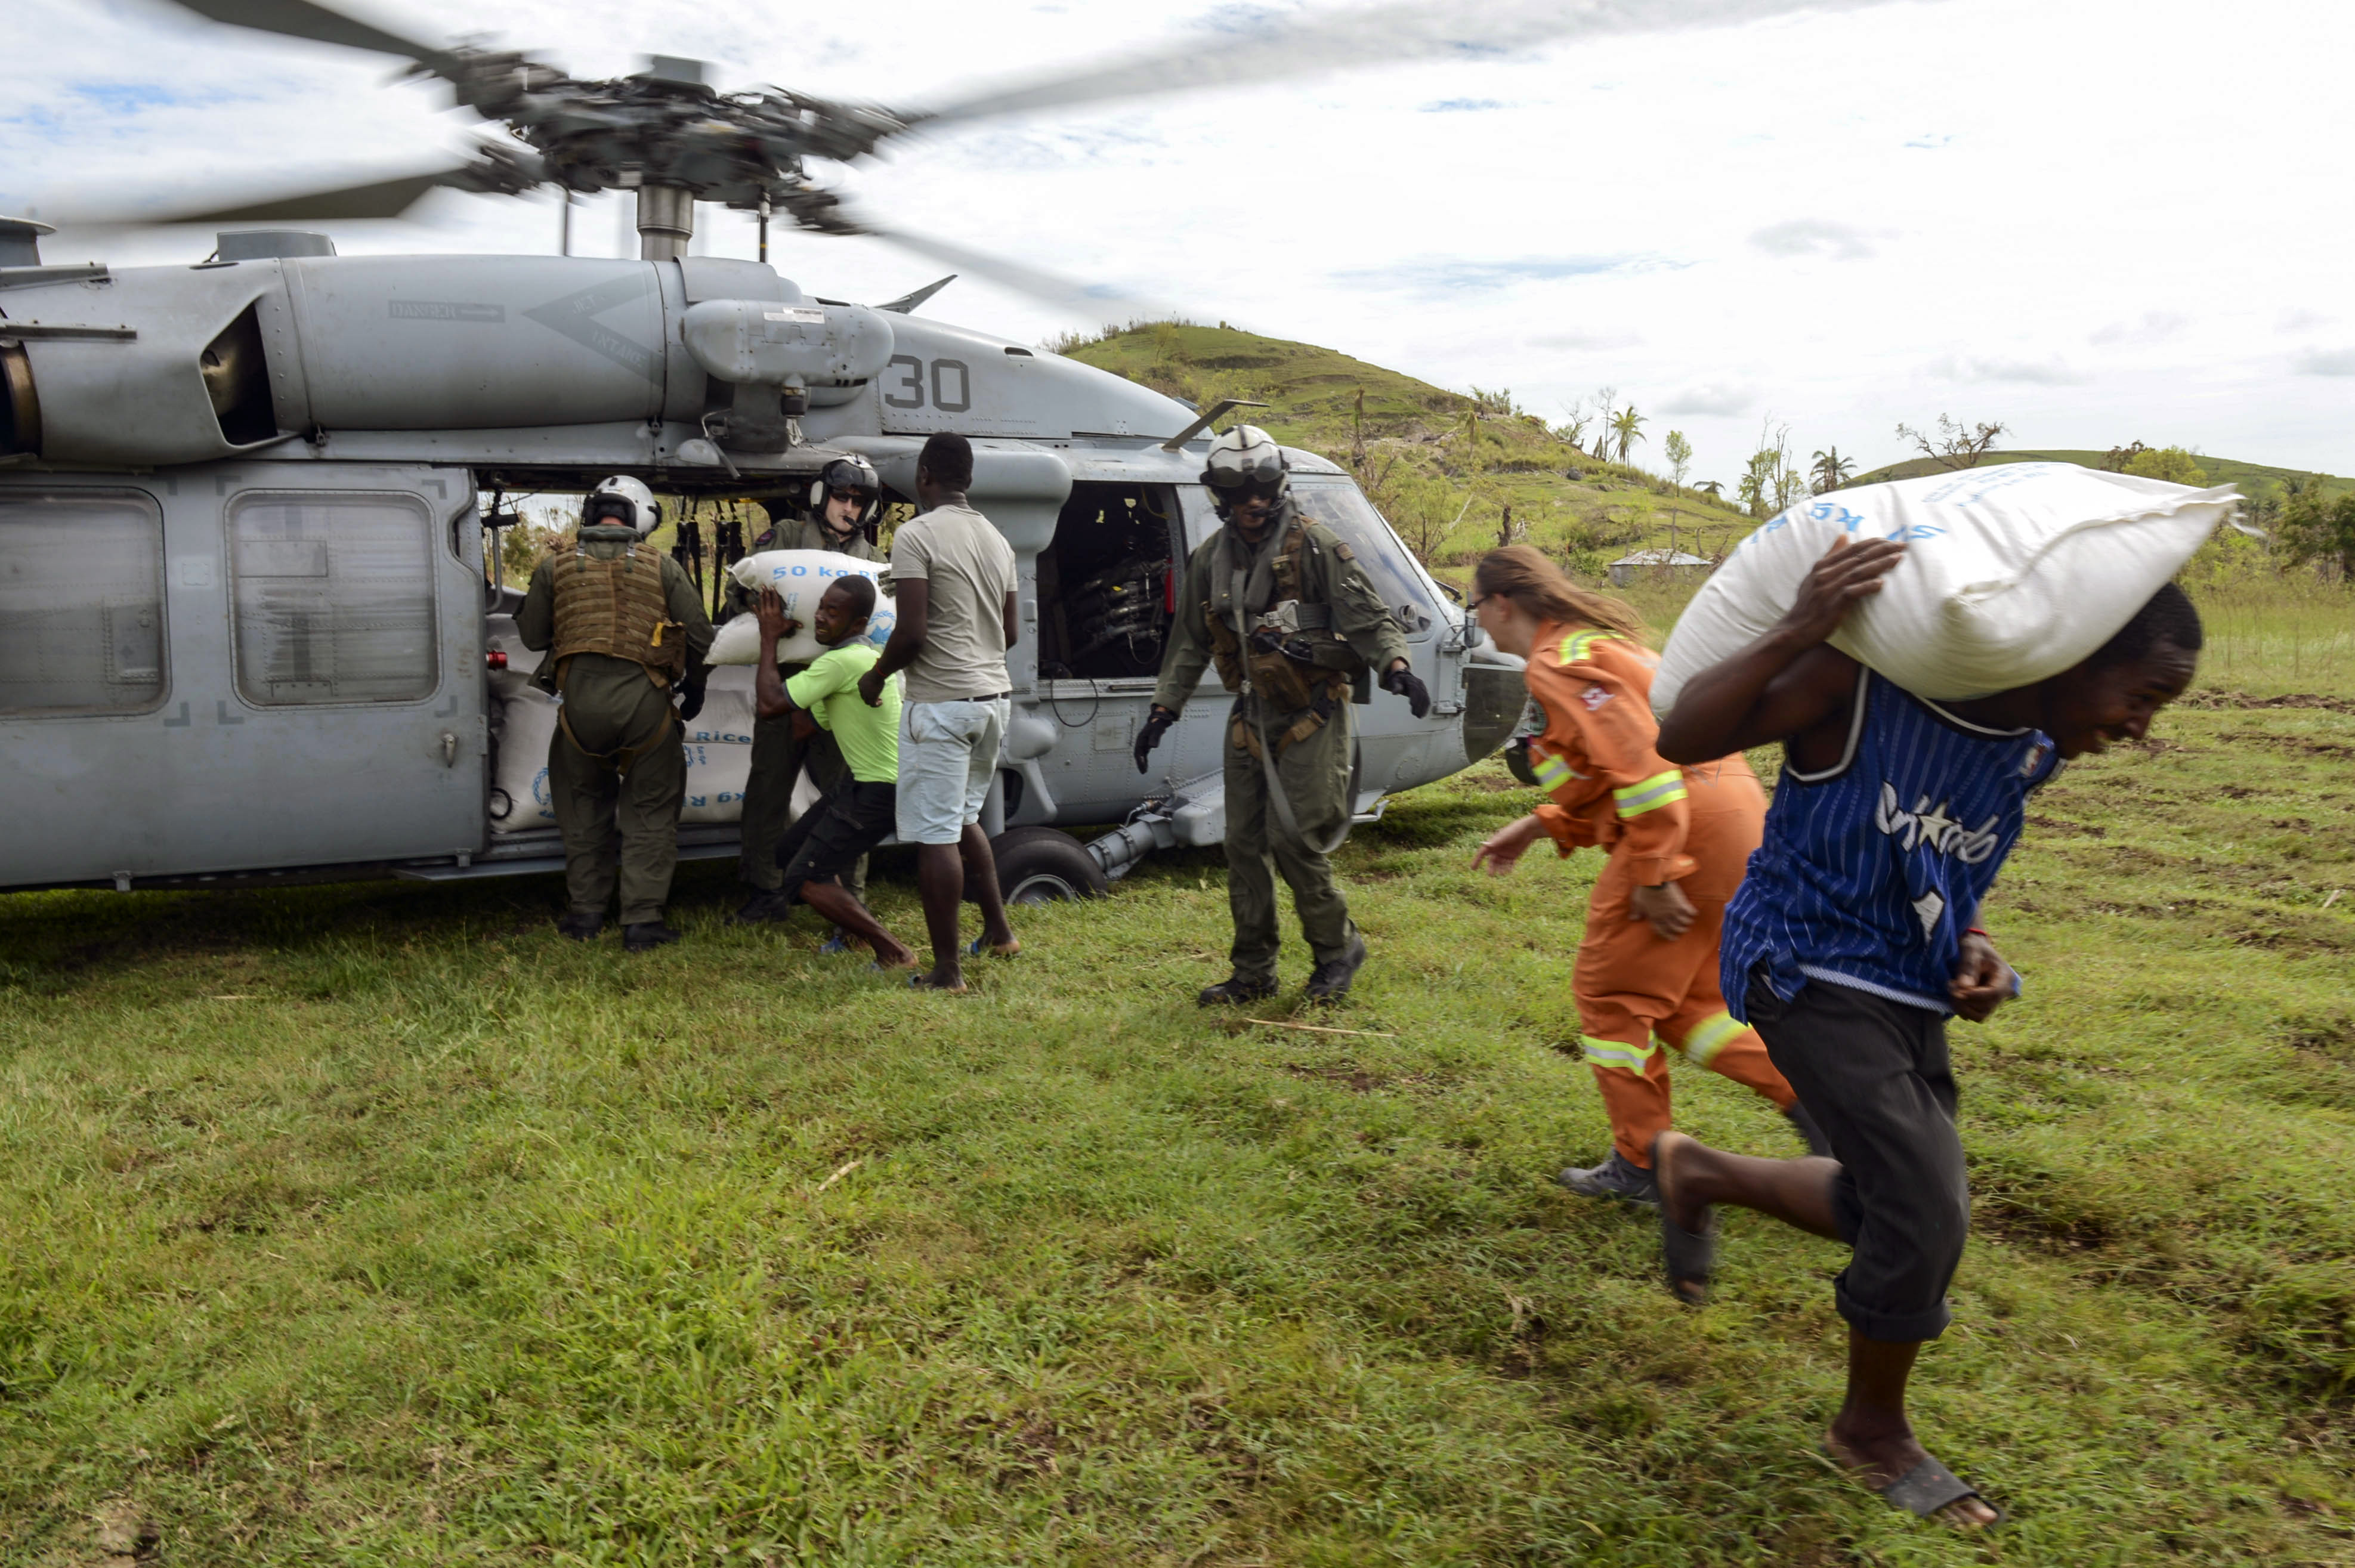 Sailors and Marines attached to Joint Task Force (JTF) Matthew deliver food to the village of Jabouin on Oct. 18. US Navy photo.